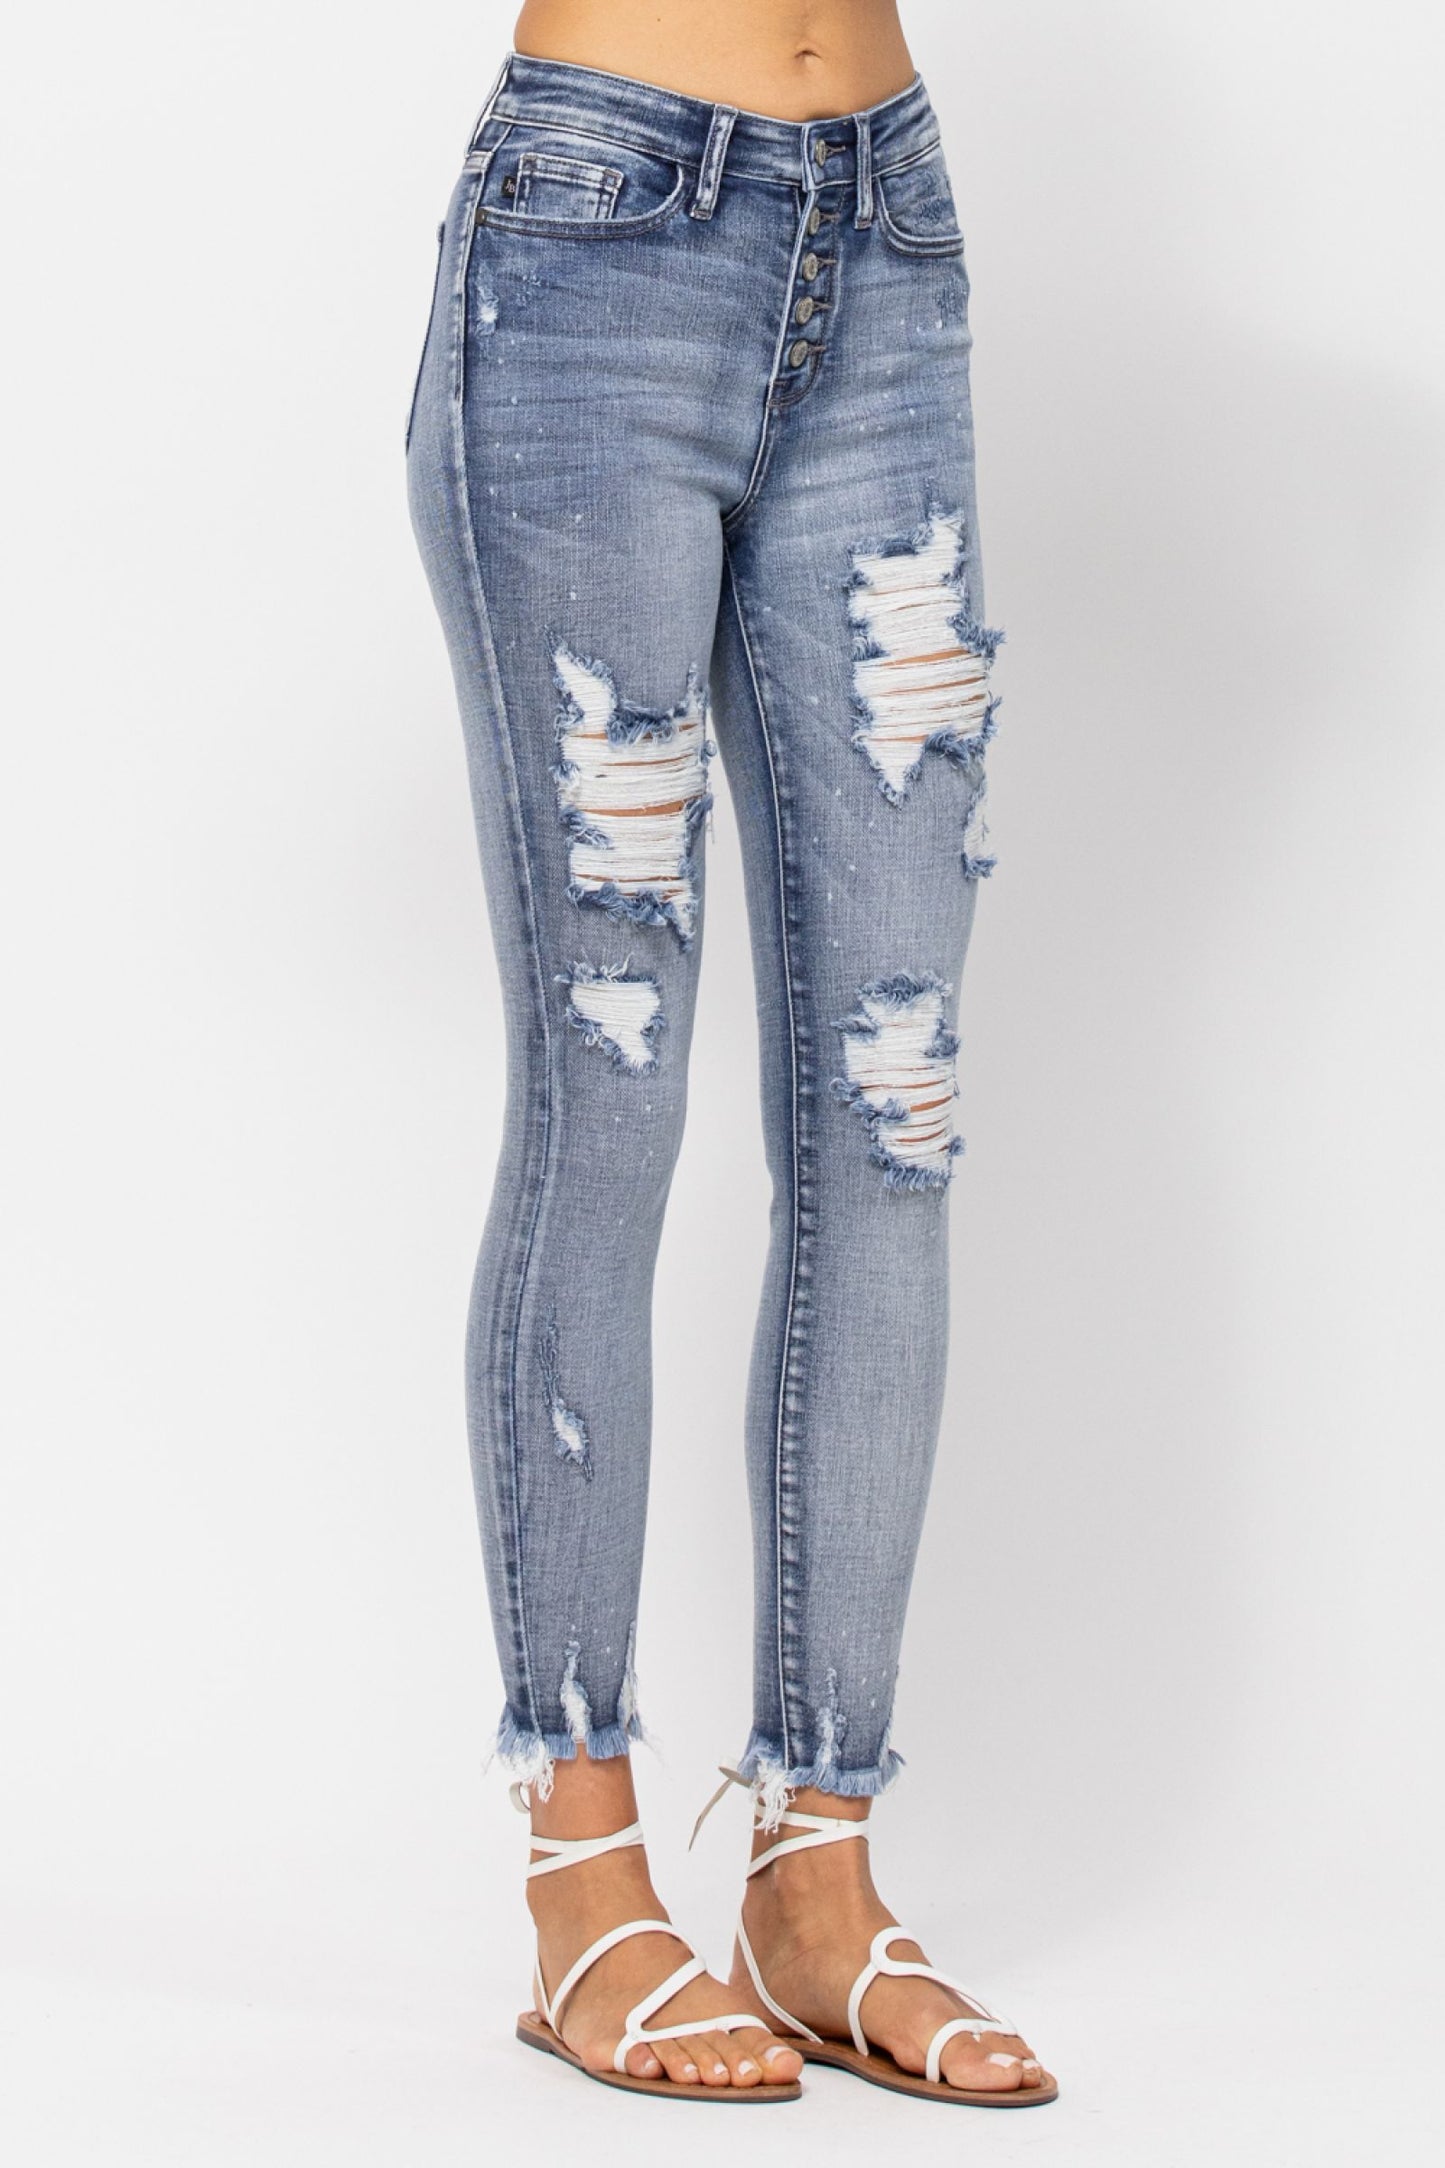 Judy Blue Partner in Crime Button Fly Bleach Splatter Distressed Skinny Jeans